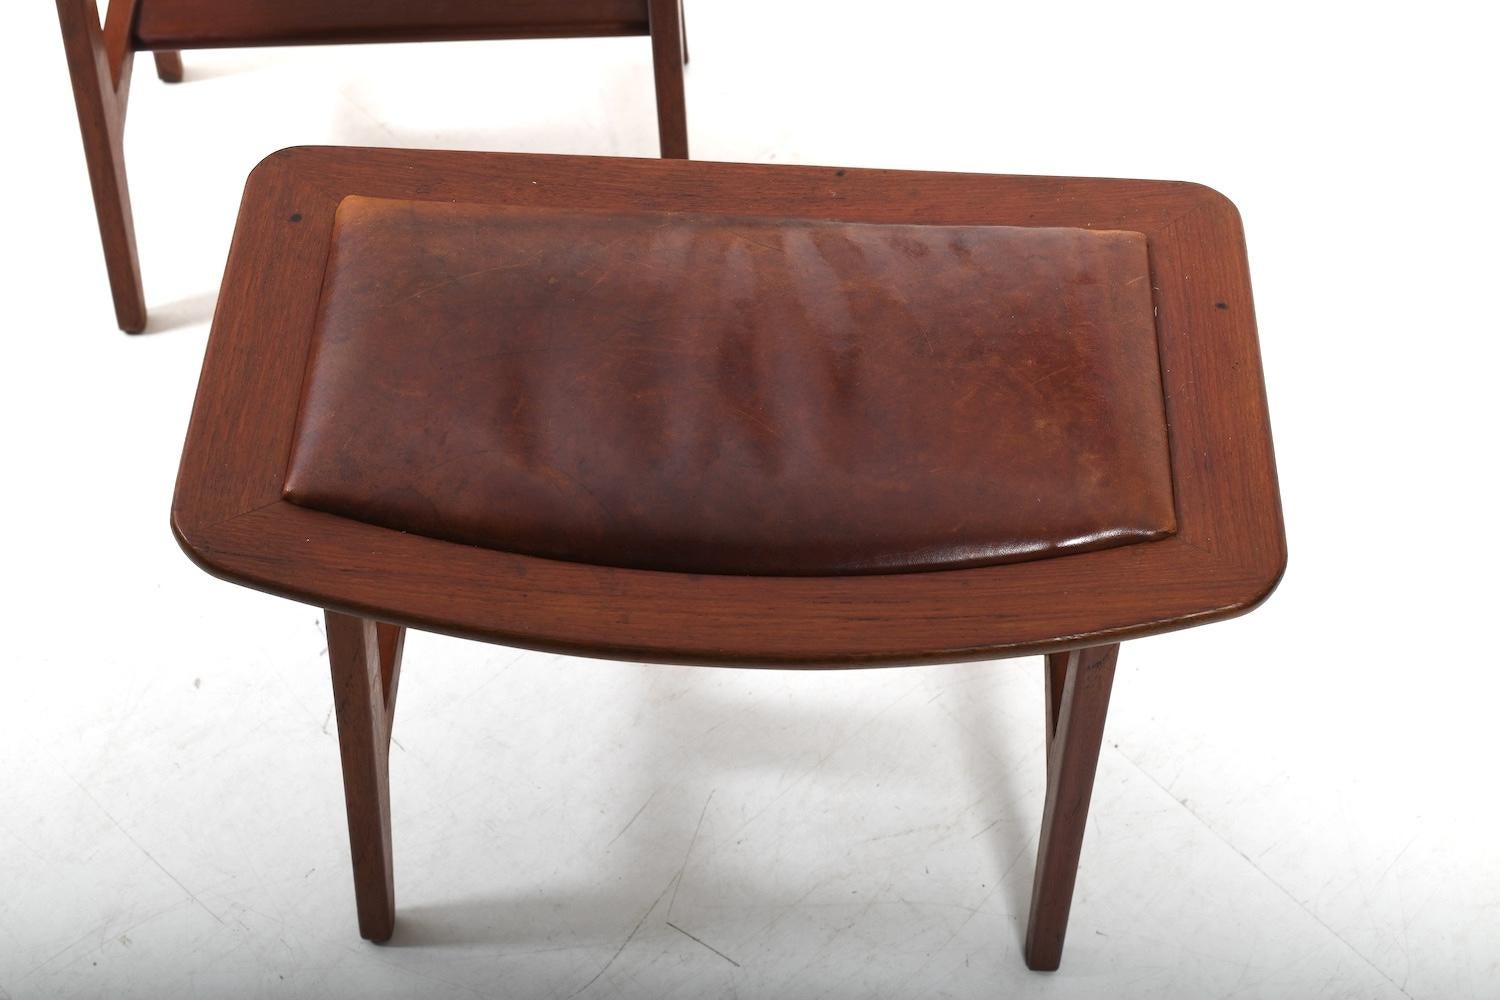 Scandinavian Modern Pair of Danish Stools in Teak and patinated Leather 1960s